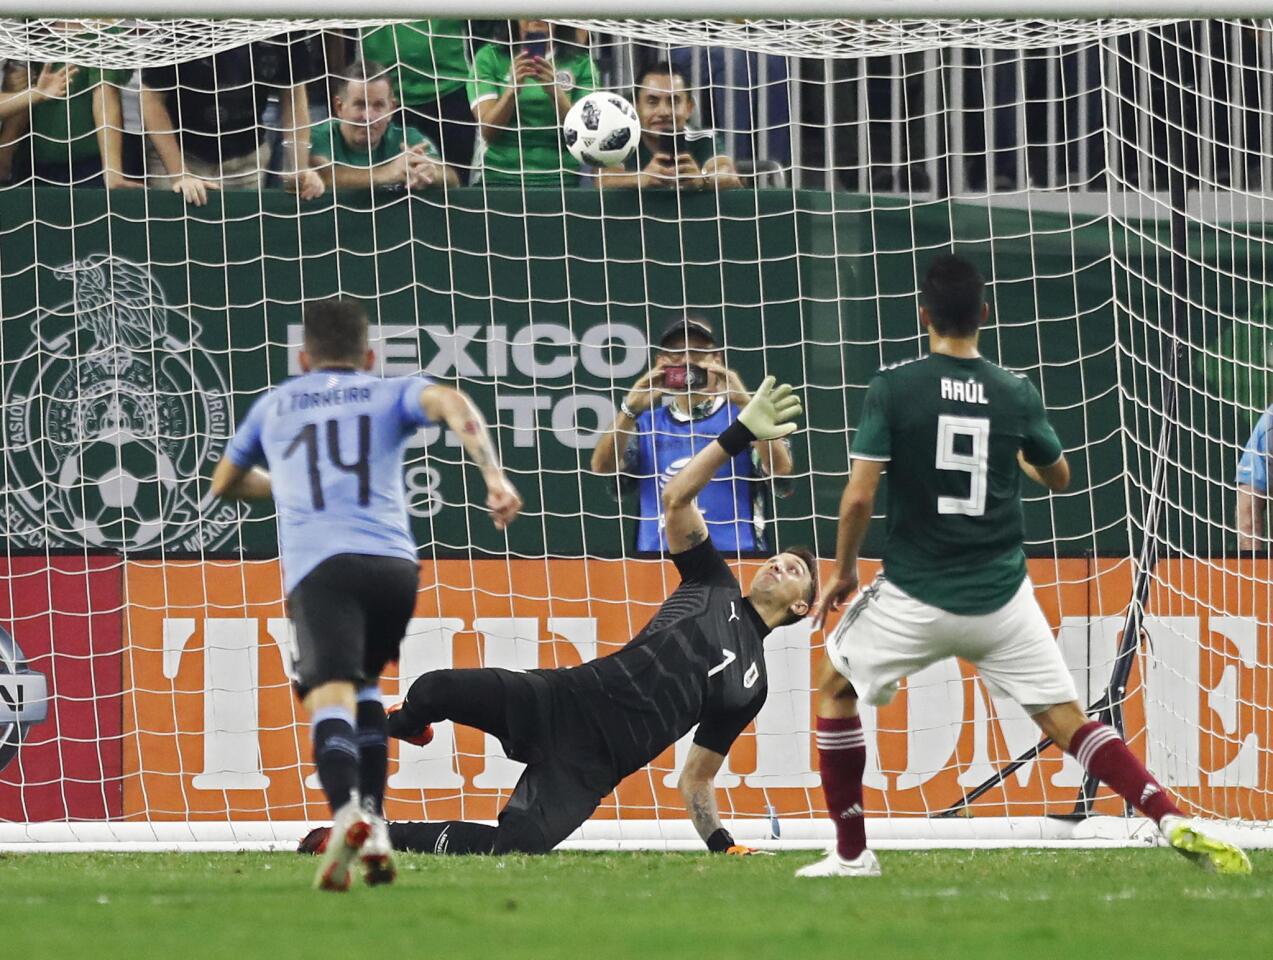 LWS113. Houston (United States), 07/09/2018.- Mexico player Raul Jimenez (R) kicks the ball in for a goal against Uruguay goalkeeper Fernando Muslera (C) in the first half of the friendly soccer match between Mexico and Uruguay at NRG Stadium in Houston,Texas, USA, 07 September 2018. (Futbol, Amistoso, Estados Unidos) EFE/EPA/LARRY W. SMITH ** Usable by HOY and SD Only **